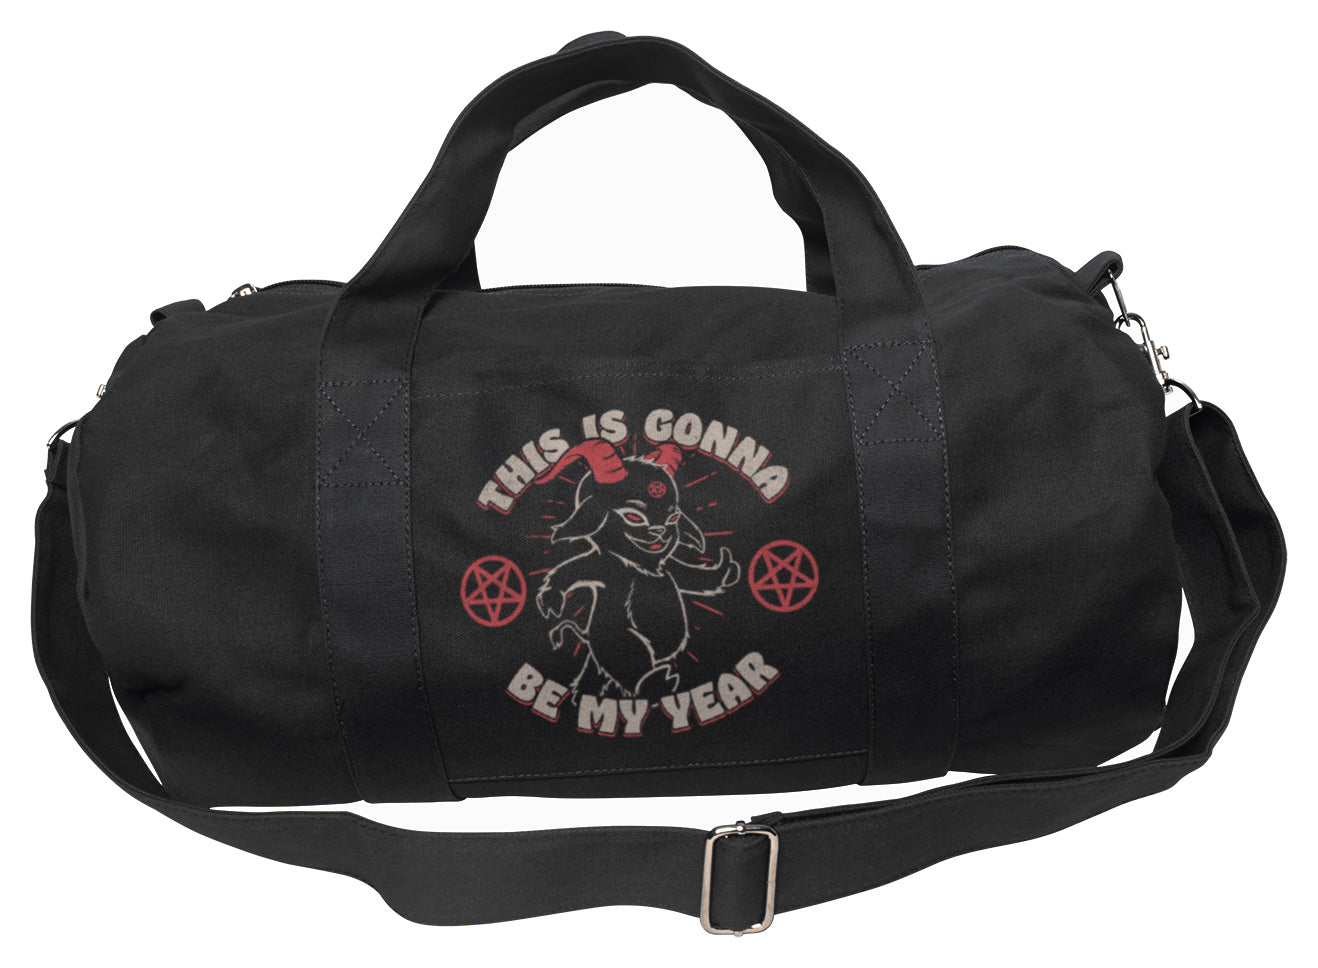 This is Gonna Be My Year Devil Duffel Bag